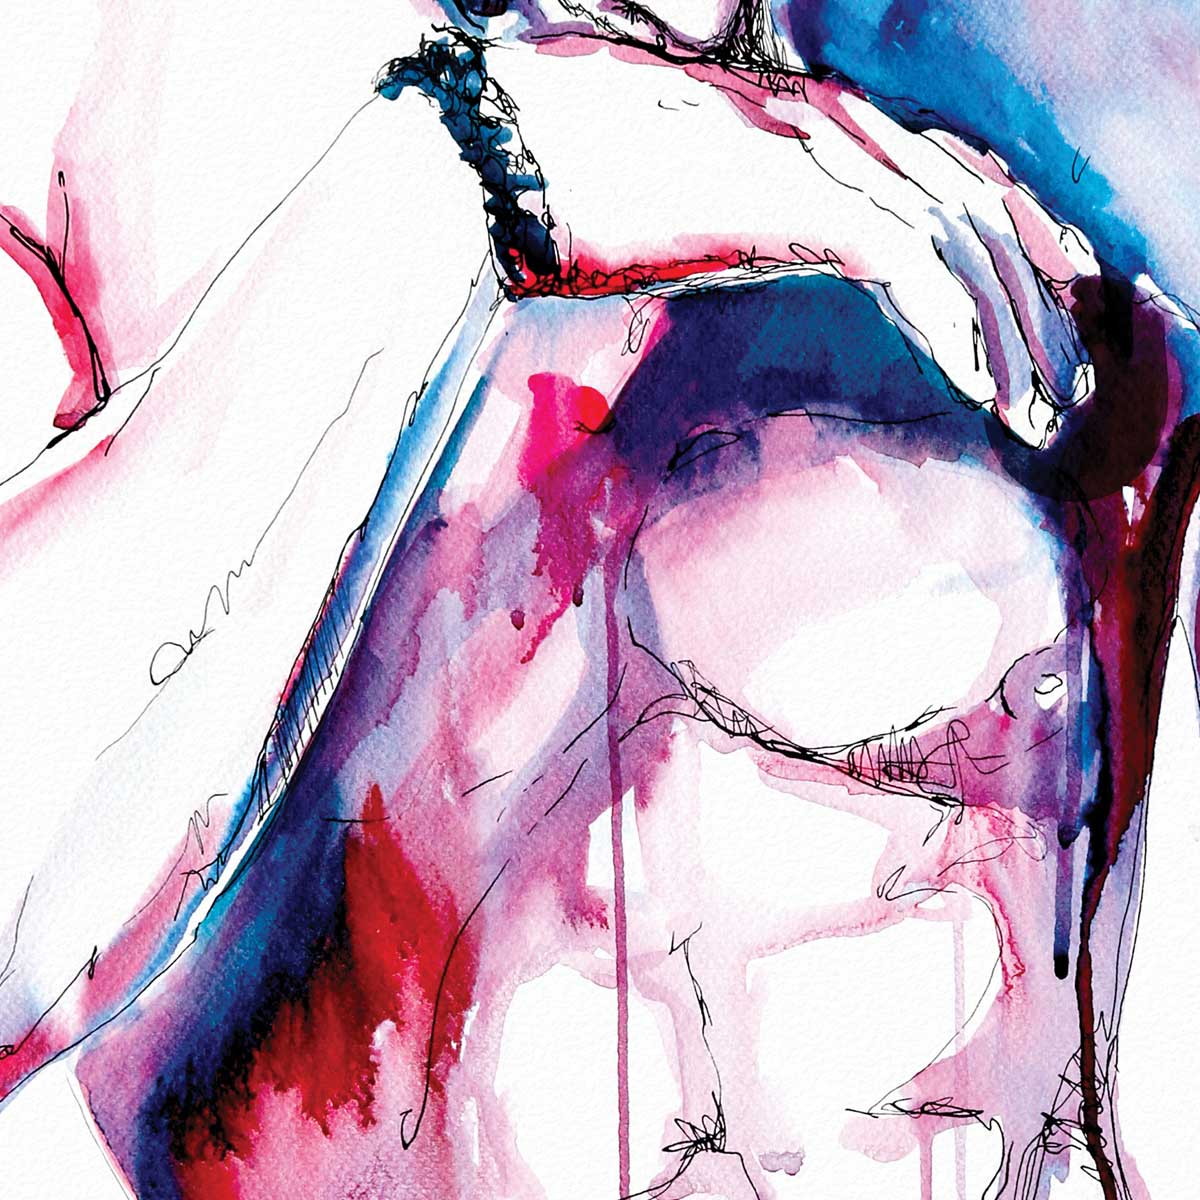 Shirtless Male Changing - Drip Style - Giclee Art Print